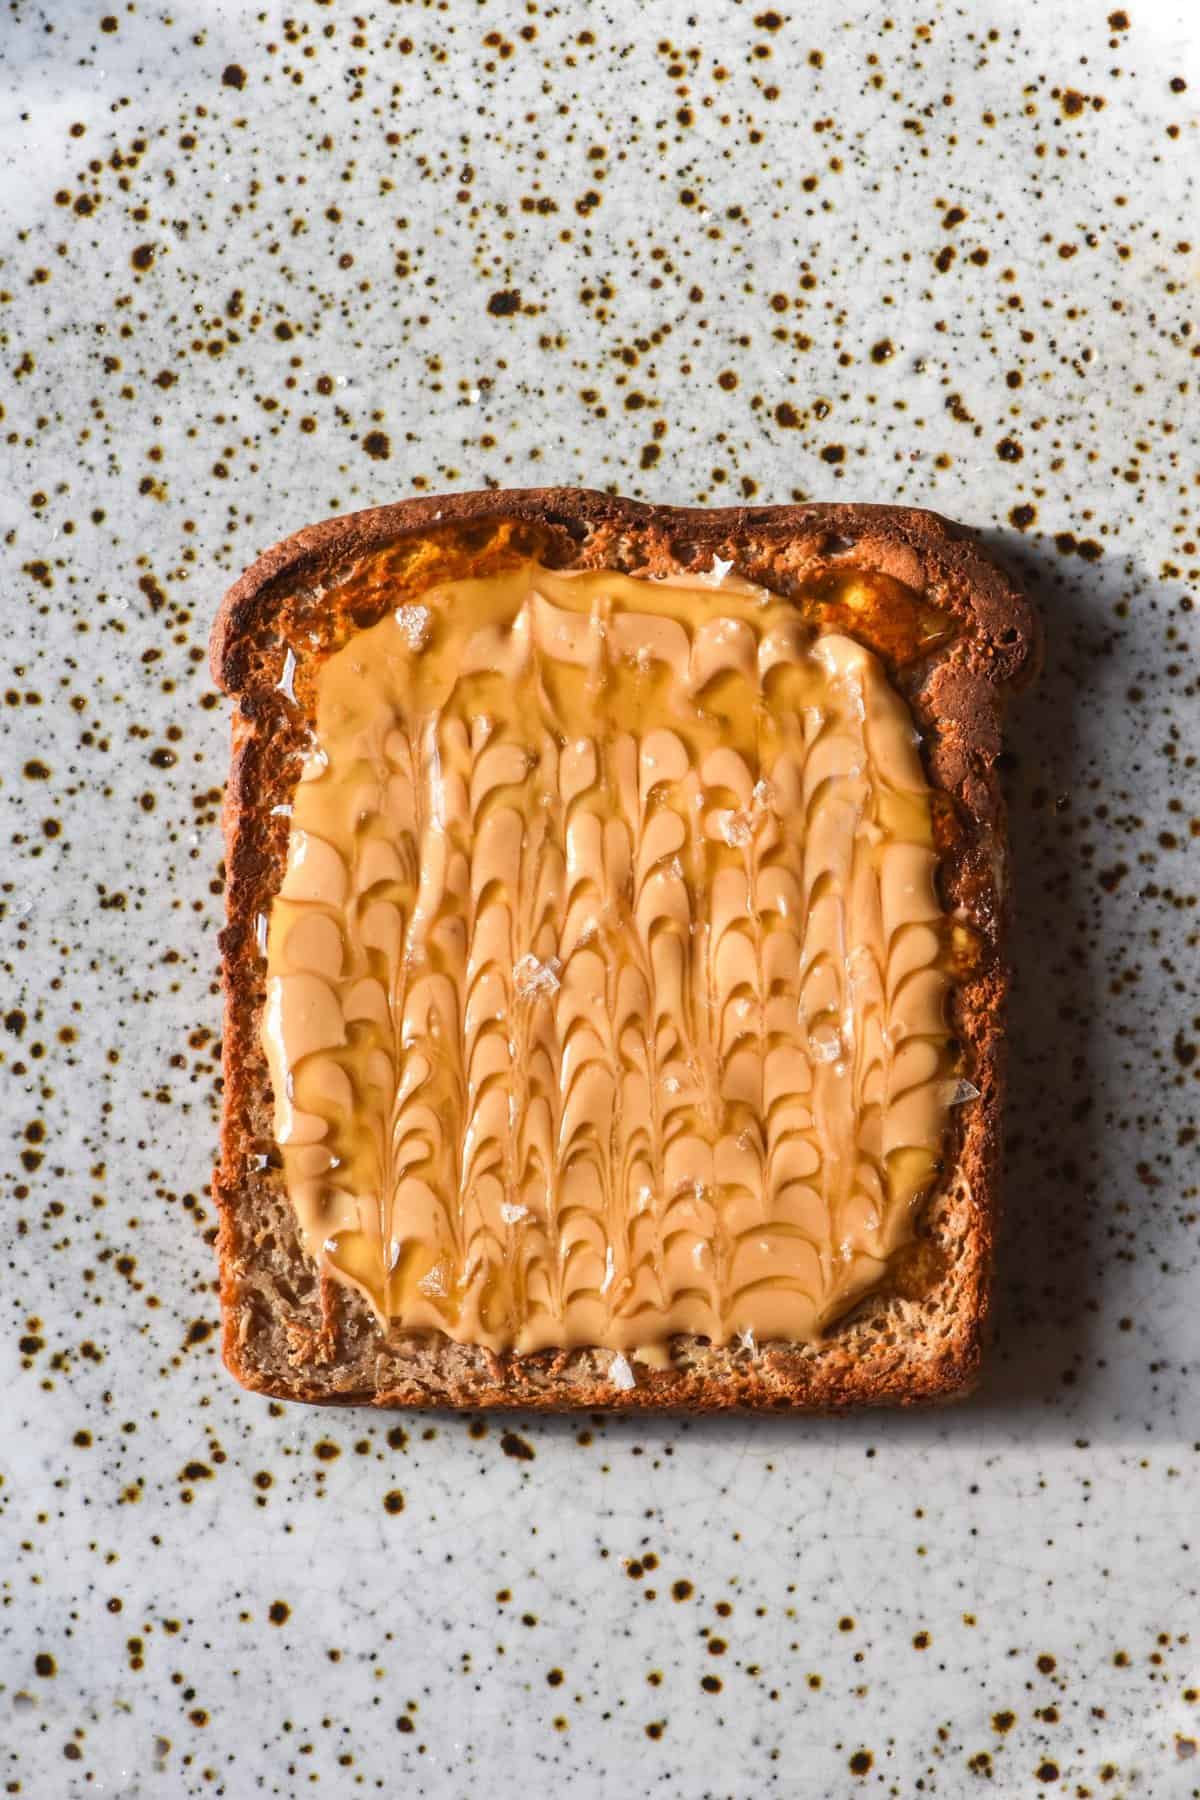 An aerial image of a slice of gluten free vegan high protein bread toasted and topped with peanut butter and rice malt syrup. The toast sits on a white speckled ceramic plate.